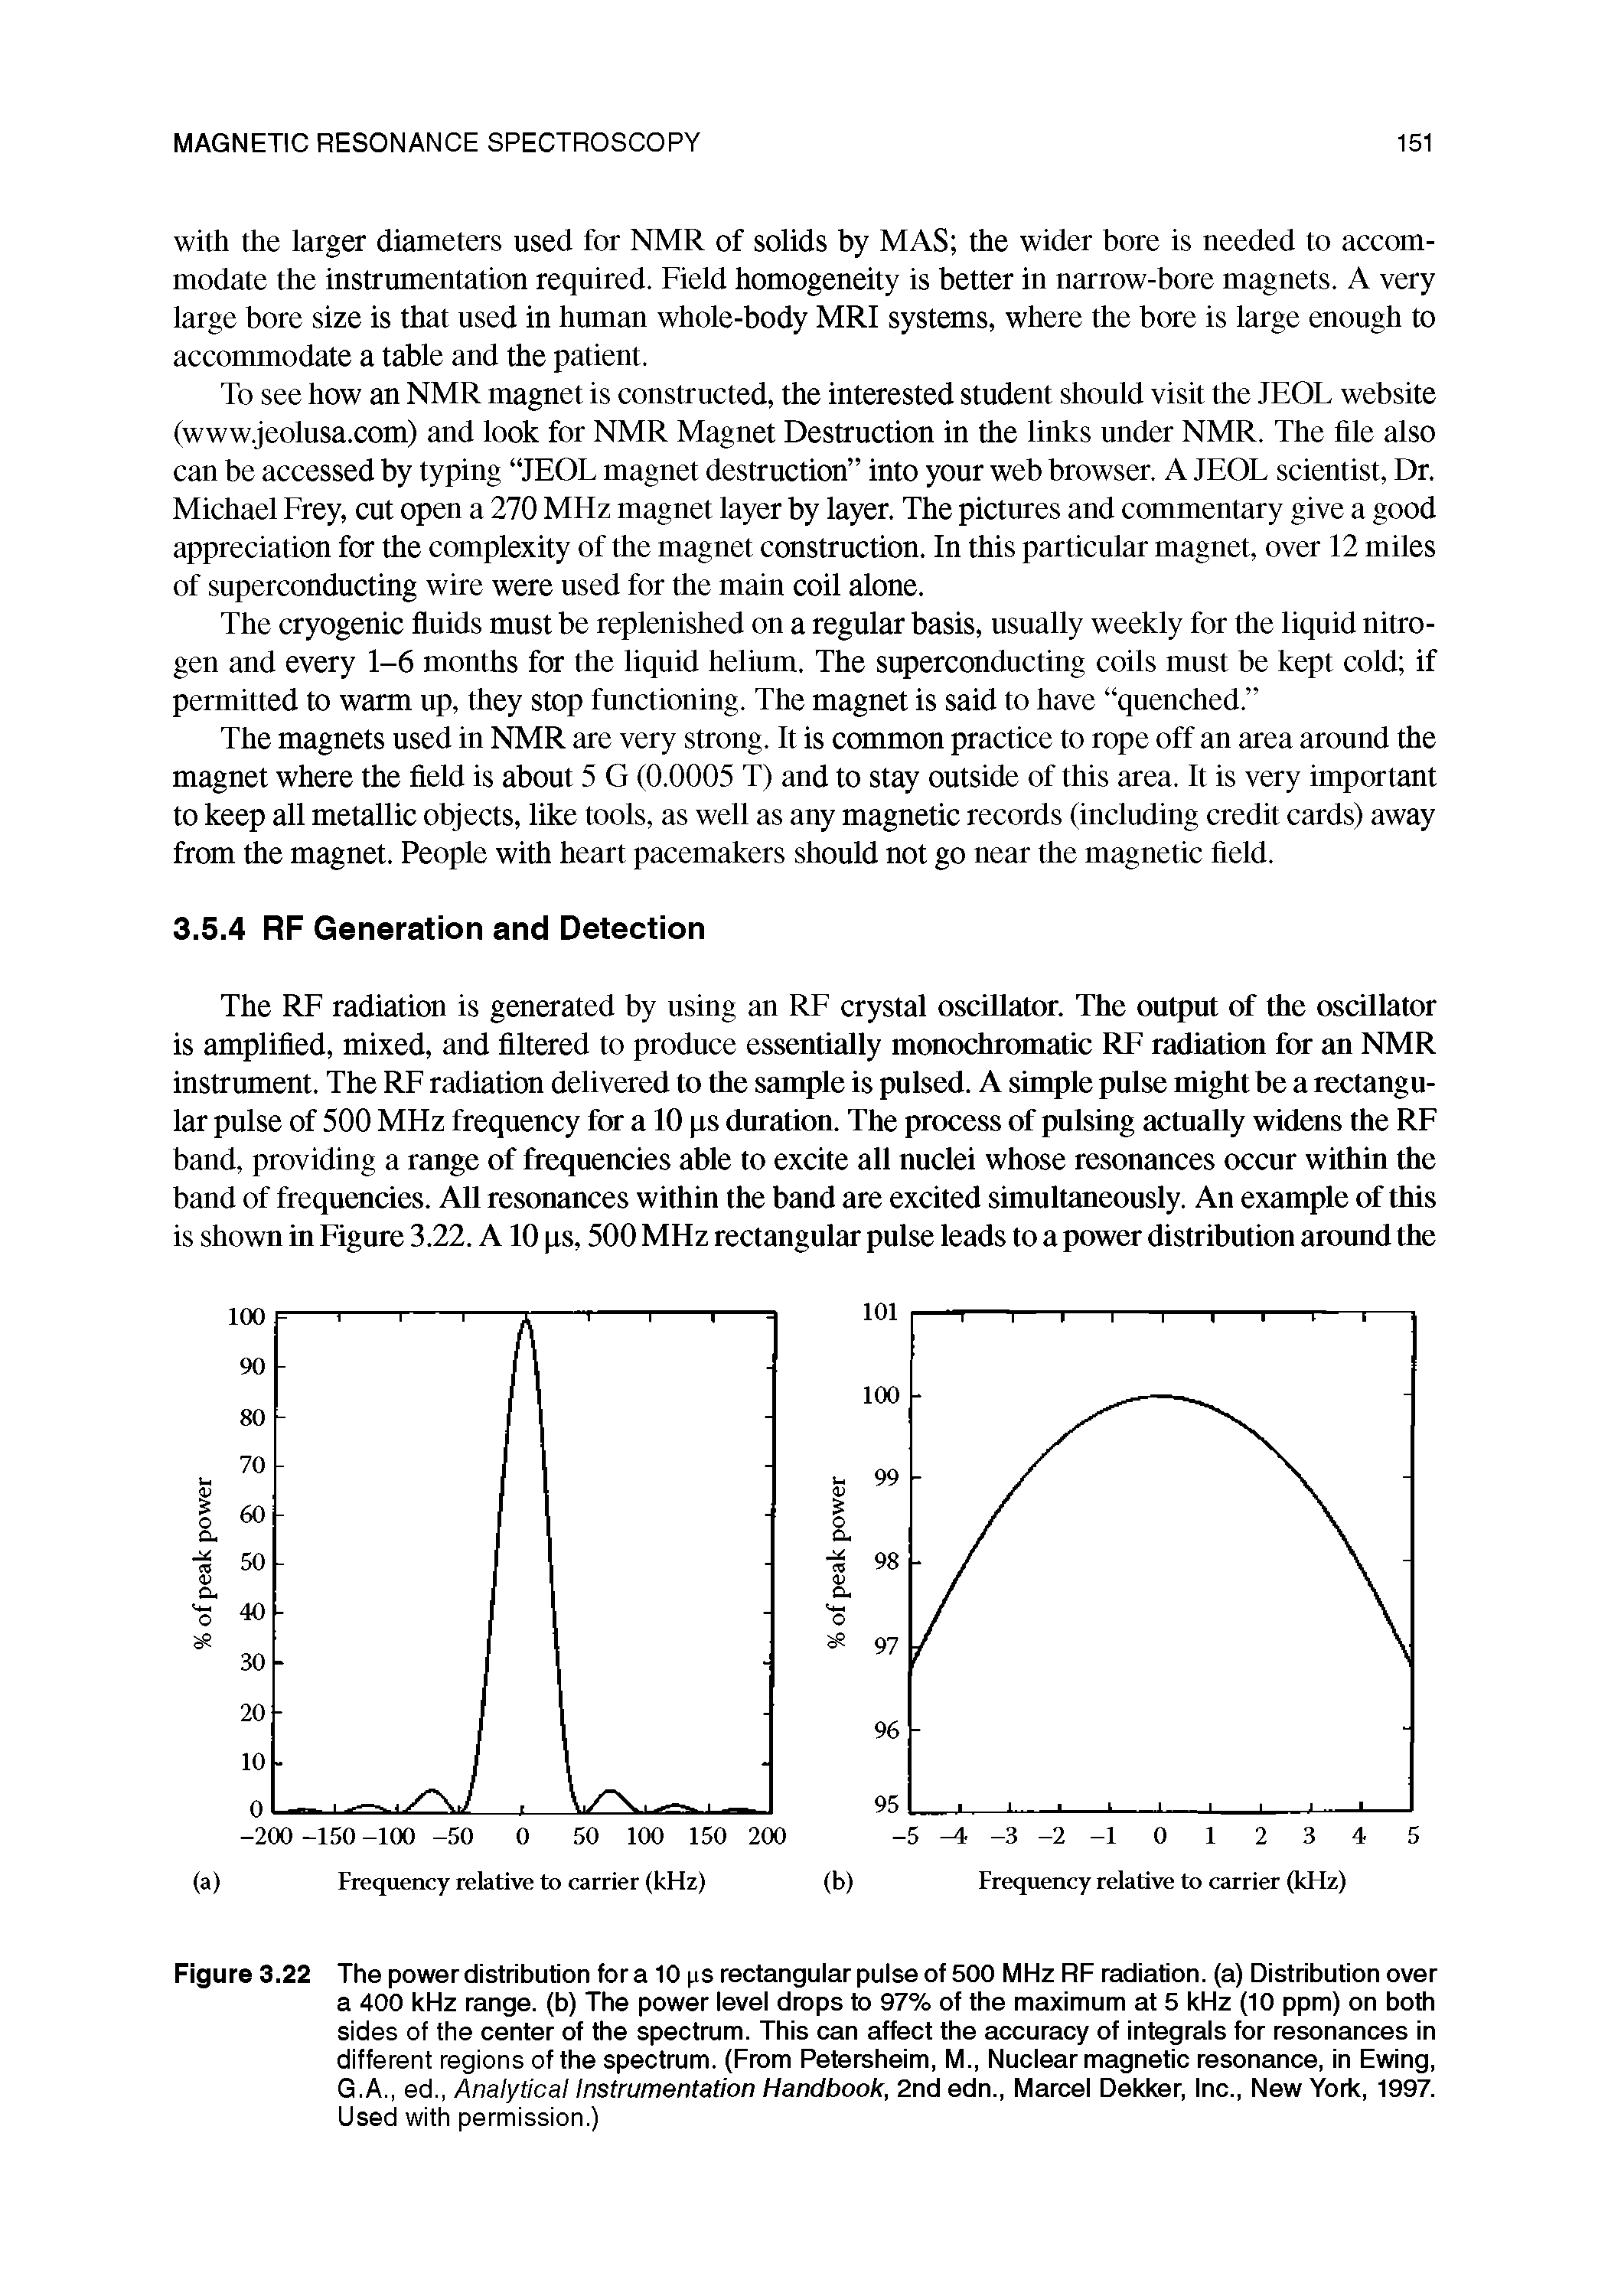 Figure 3.22 The power distribution for a 10 ps rectangular pulse of 500 MHz RF radiation, (a) Distribution over a 400 kHz range, (b) The power level drops to 97% of the maximum at 5 kHz (10 ppm) on both sides of the center of the spectrum. This can affect the accuracy of integrals for resonances in different regions of the spectrum. (From Petersheim, M., Nuclear magnetic resonance, in Ewing, G.A., ed.. Analytical Instrumentation Handbook, 2nd edn., Marcel Dekker, Inc., New York, 1997. Used with permission.)...